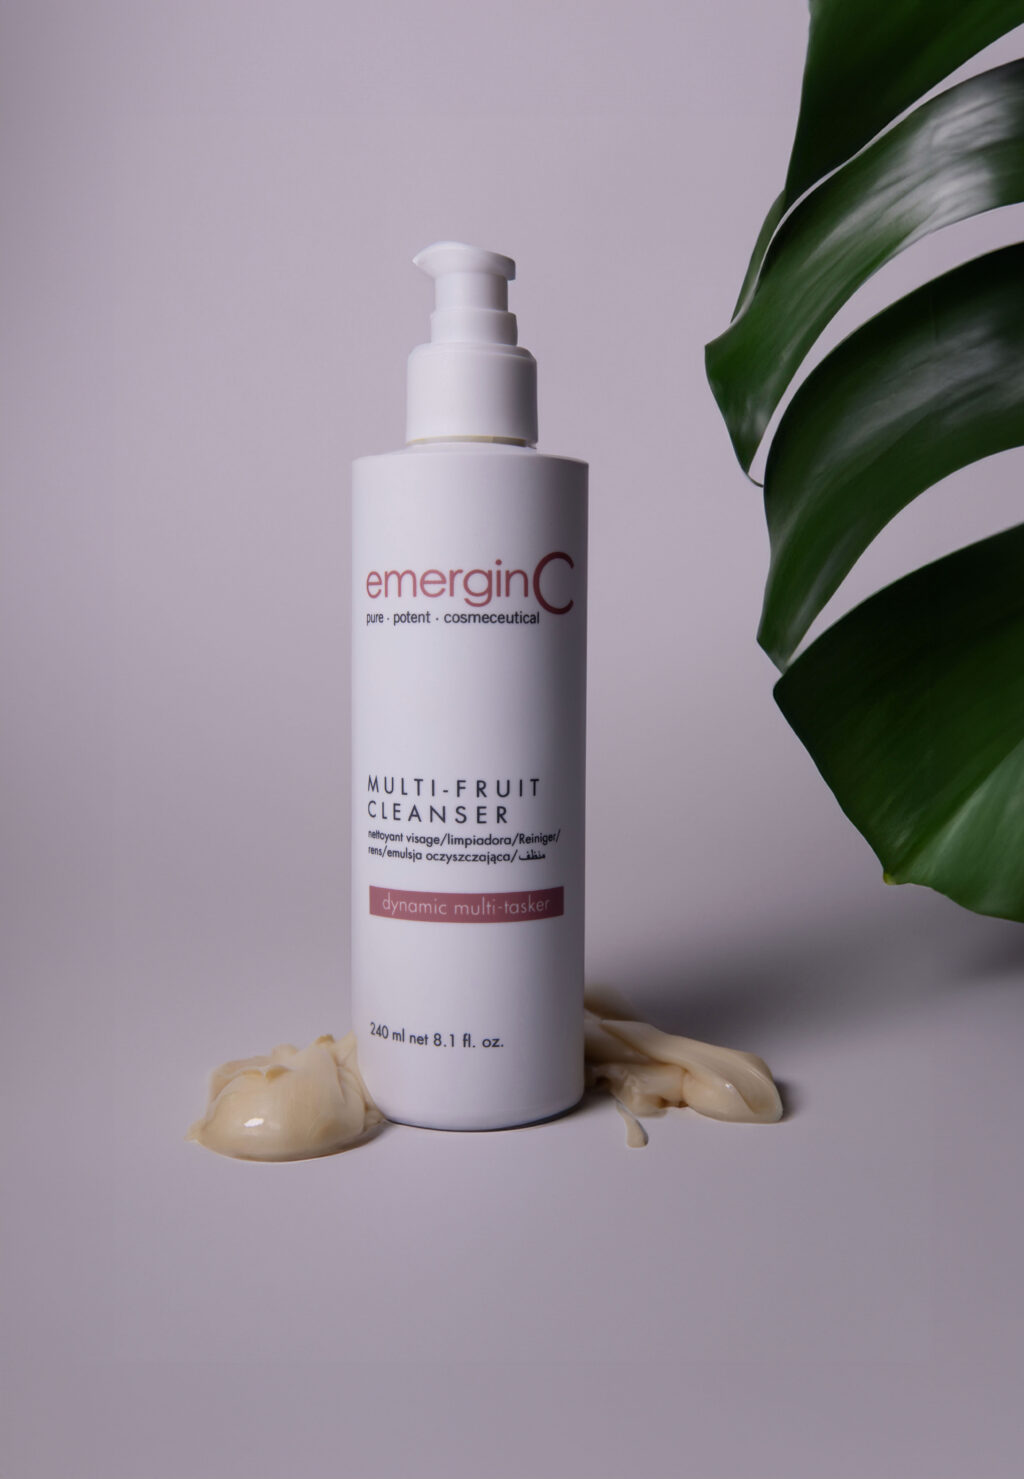 Bottle of emerginc multi-fruit cleanser with a pump dispenser, some multi-fruit cleanser spilled in front and a green leaf in the background, displayed against a neutral background.